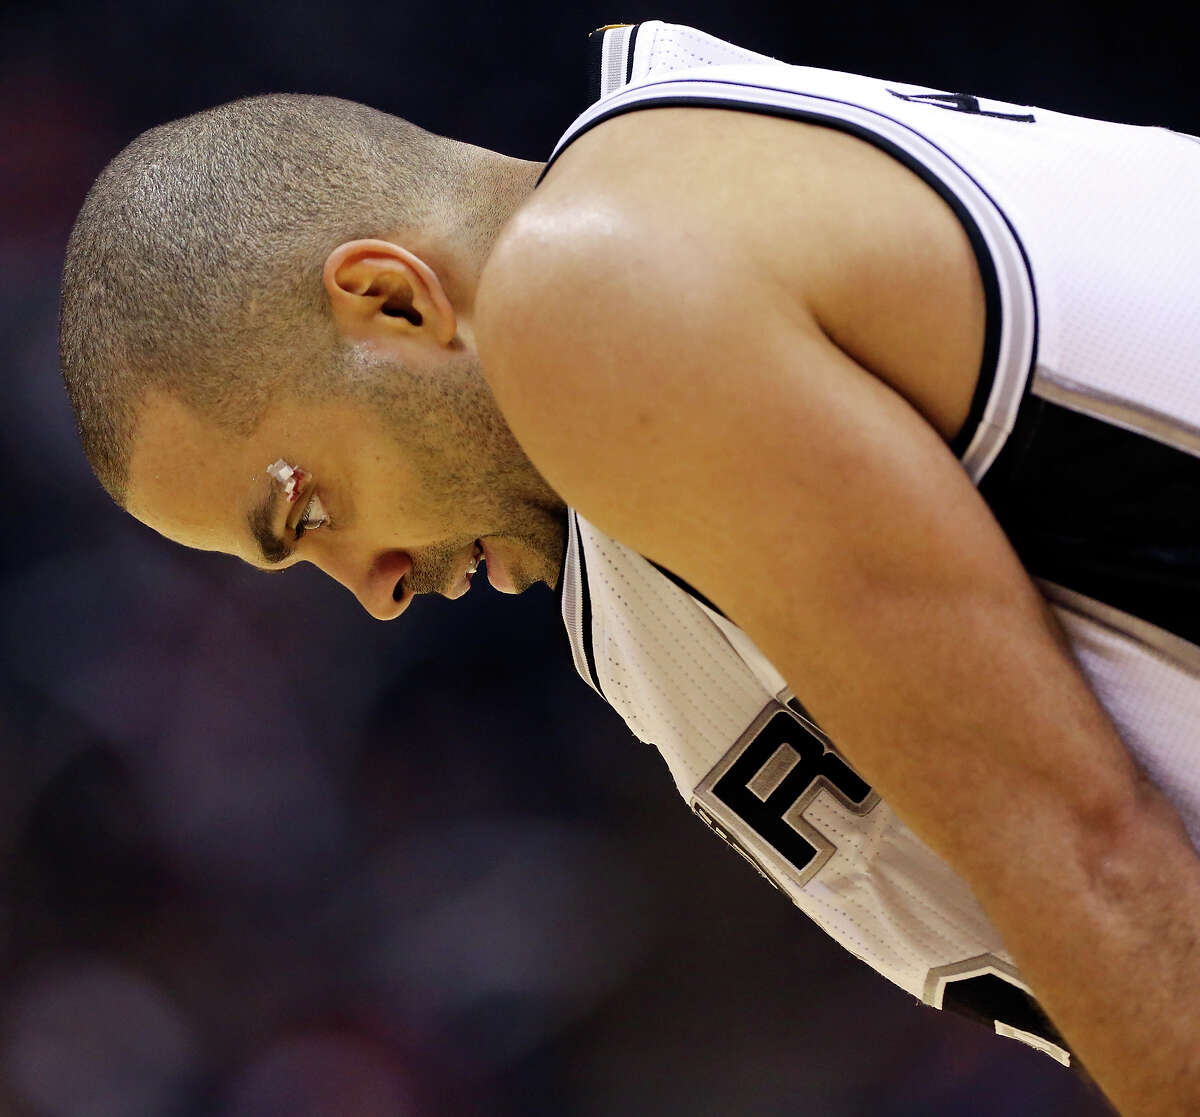 San Antonio Spurs' Tony Parker pauses during a timeout in second half action of Game 4 in the Western Conference playoffs against the Los Angeles Clippers Sunday April 26, 2015 at the AT&T Center. The Clippers won 114-105.